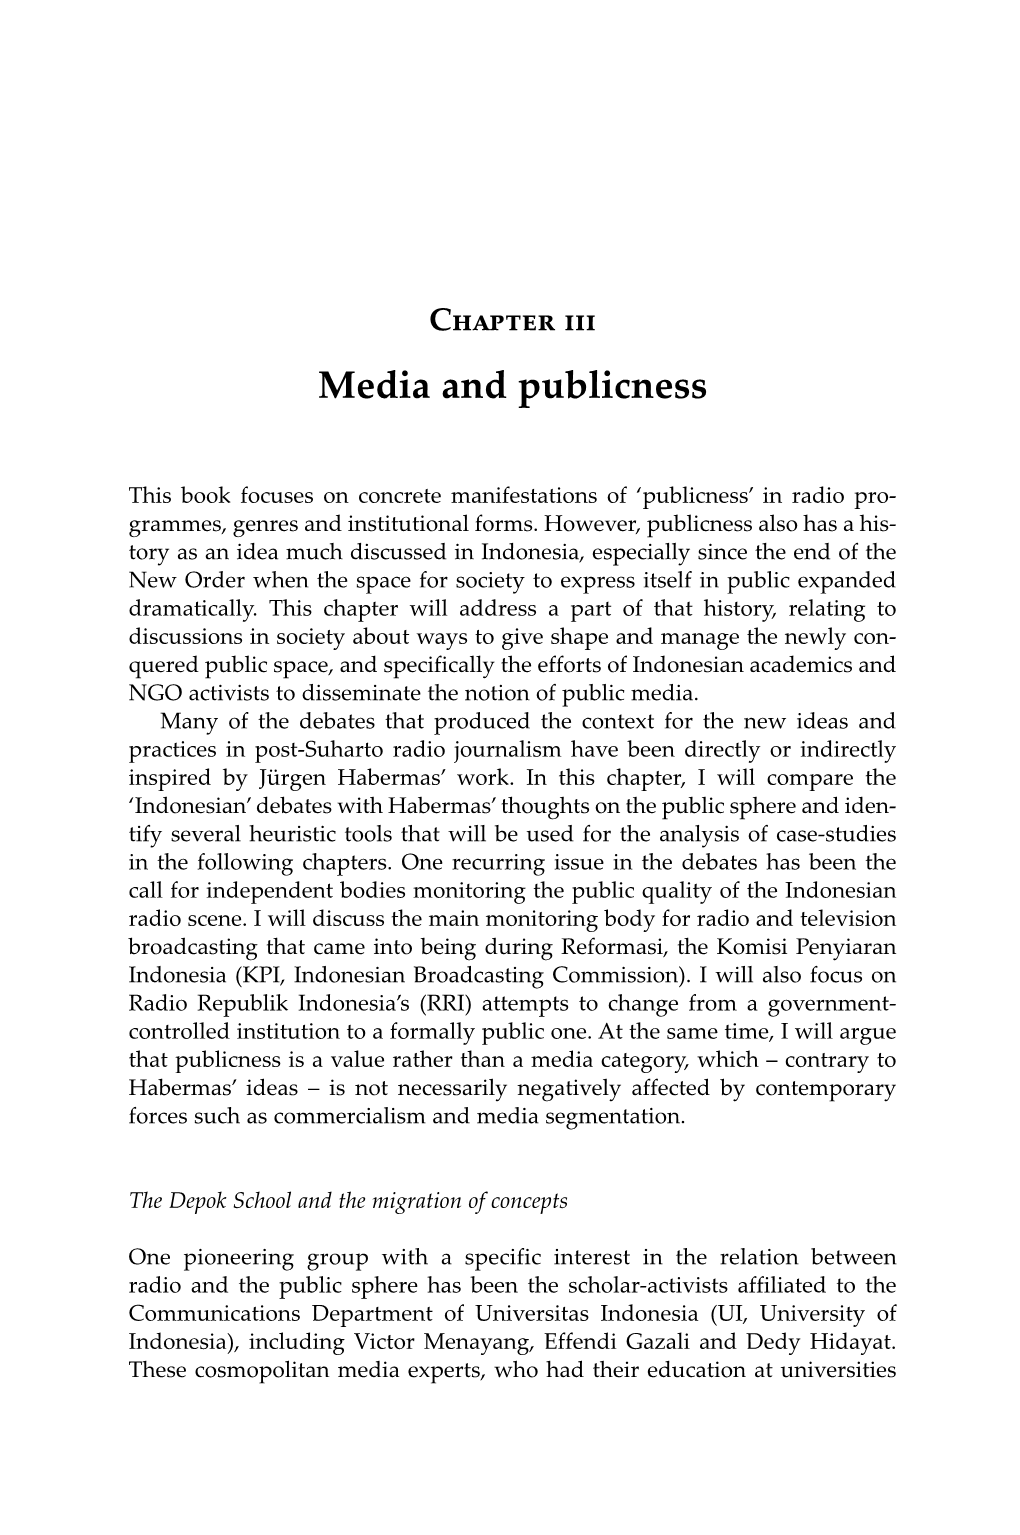 Media and Publicness